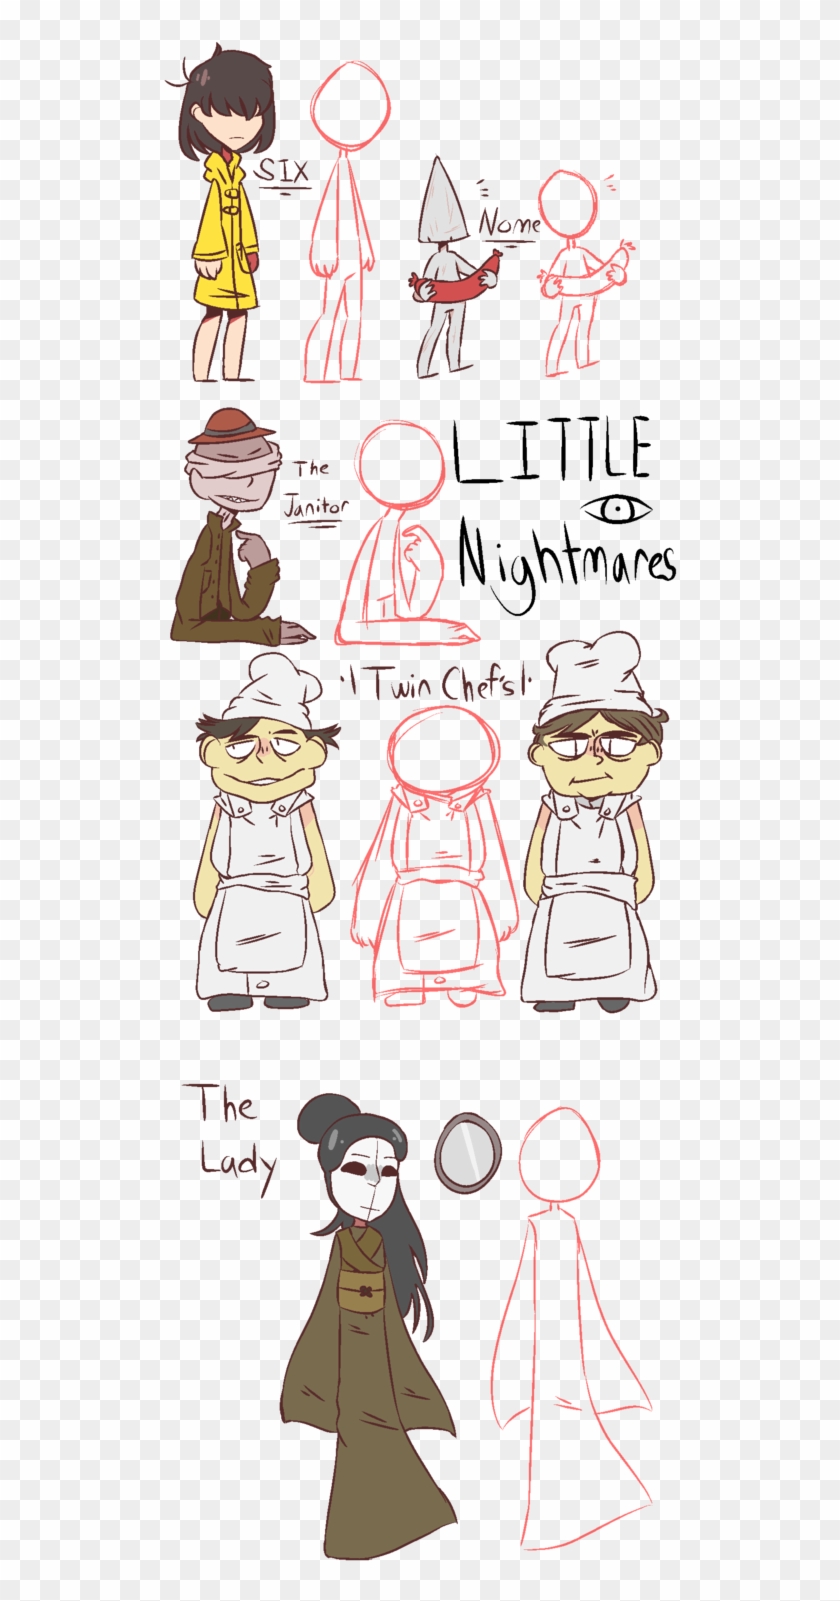 Little Nightmares By Mamidshi - Face Little Nightmares The Twin Chefs Clipart